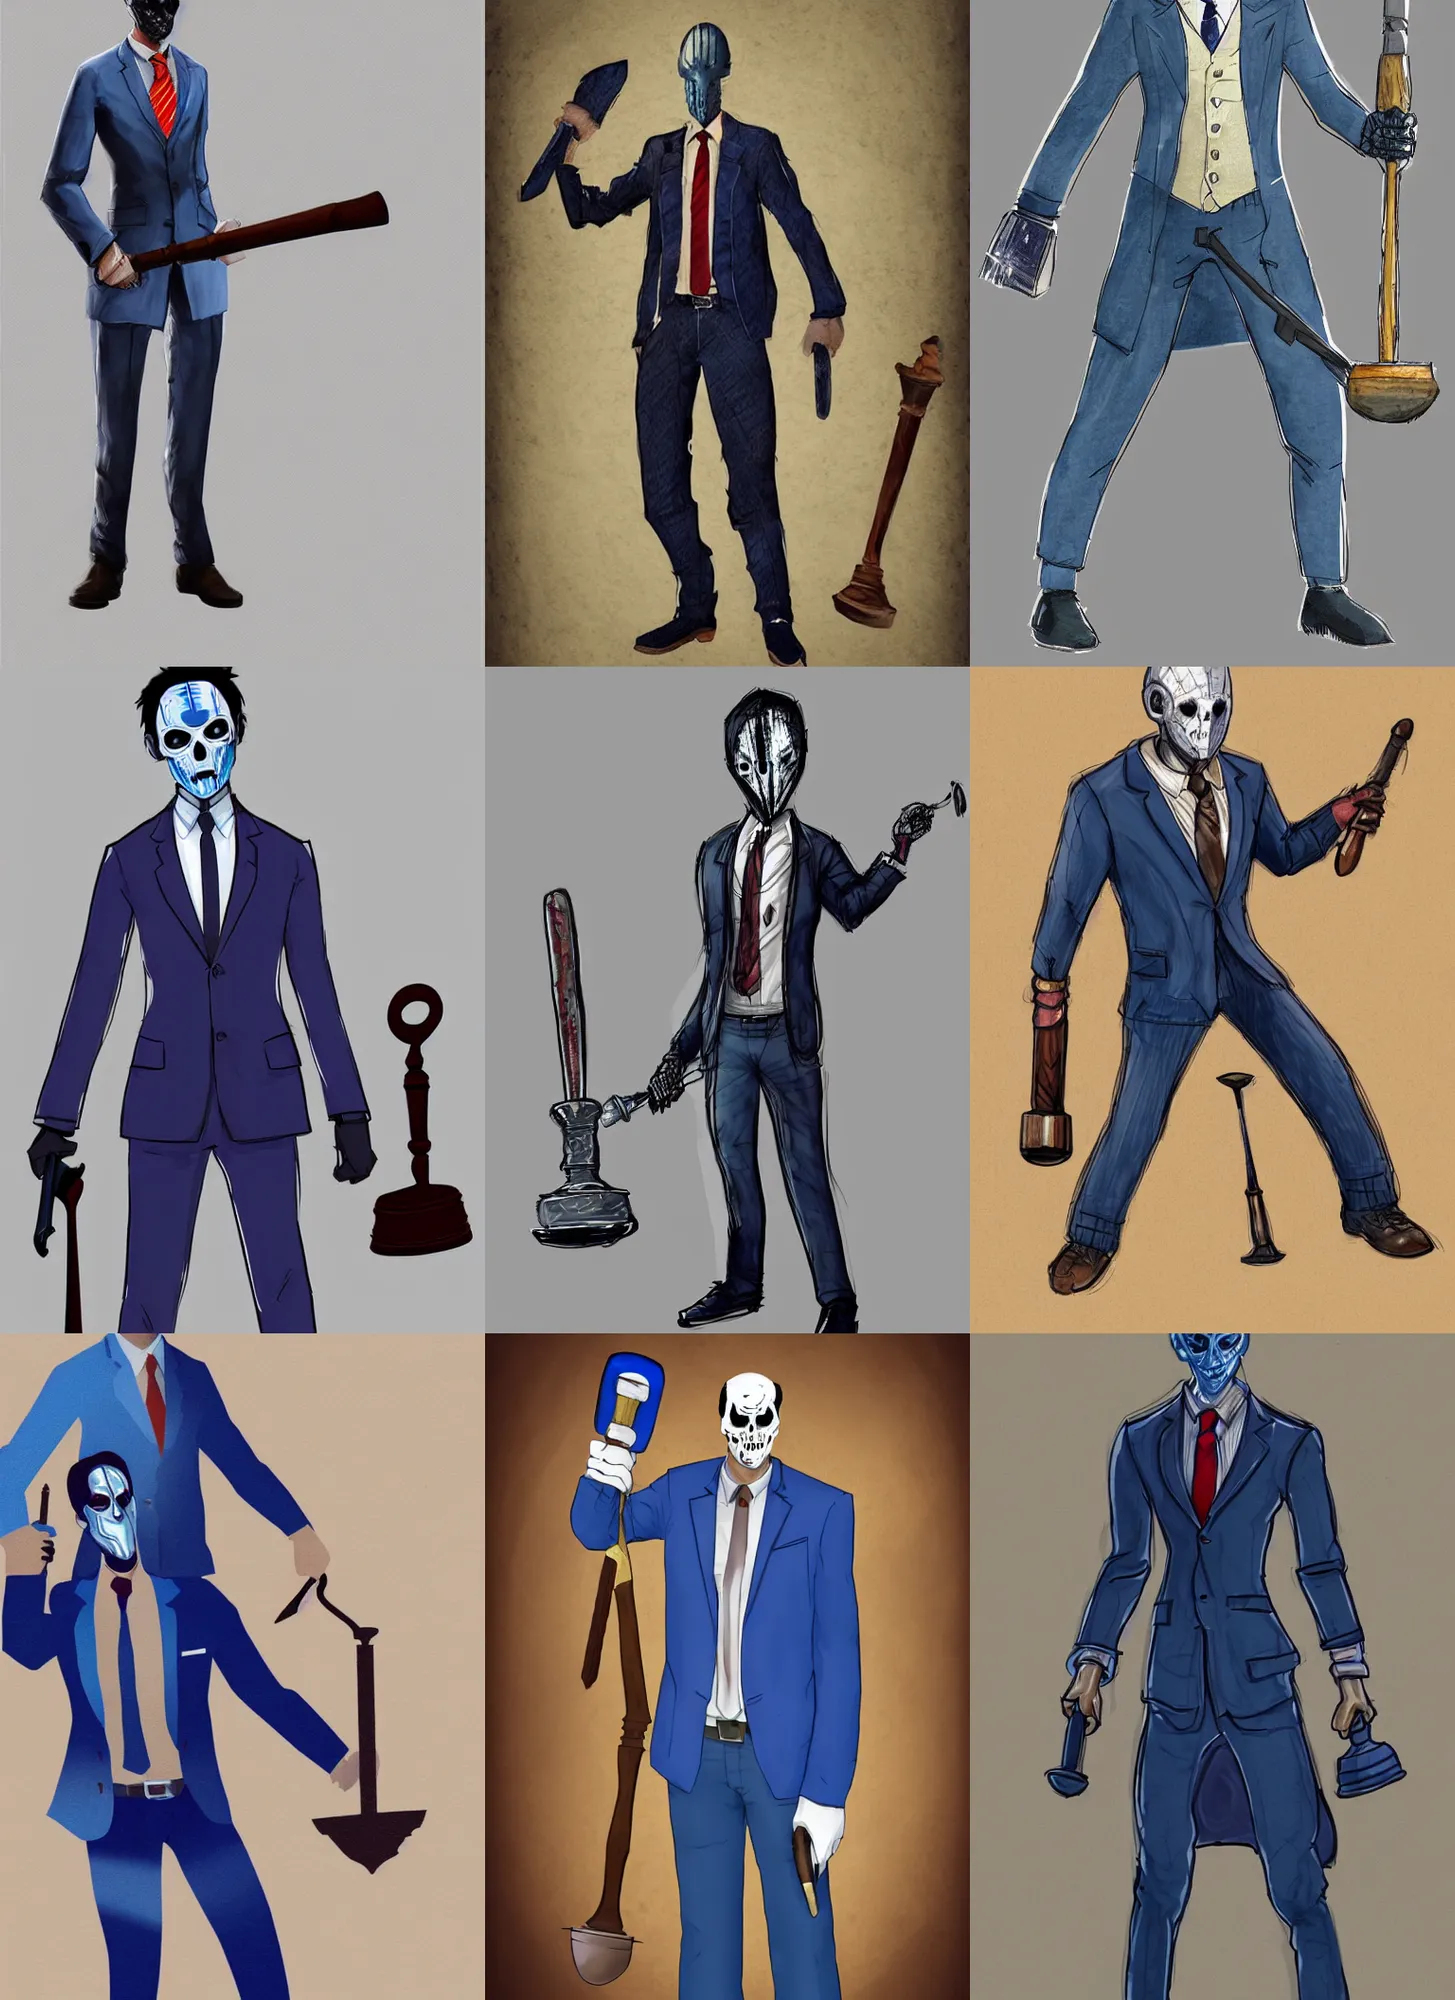 Prompt: concept art of a dead by daylight killer lawyer wearing a blue business suit with gavel hammer hands, character portrait